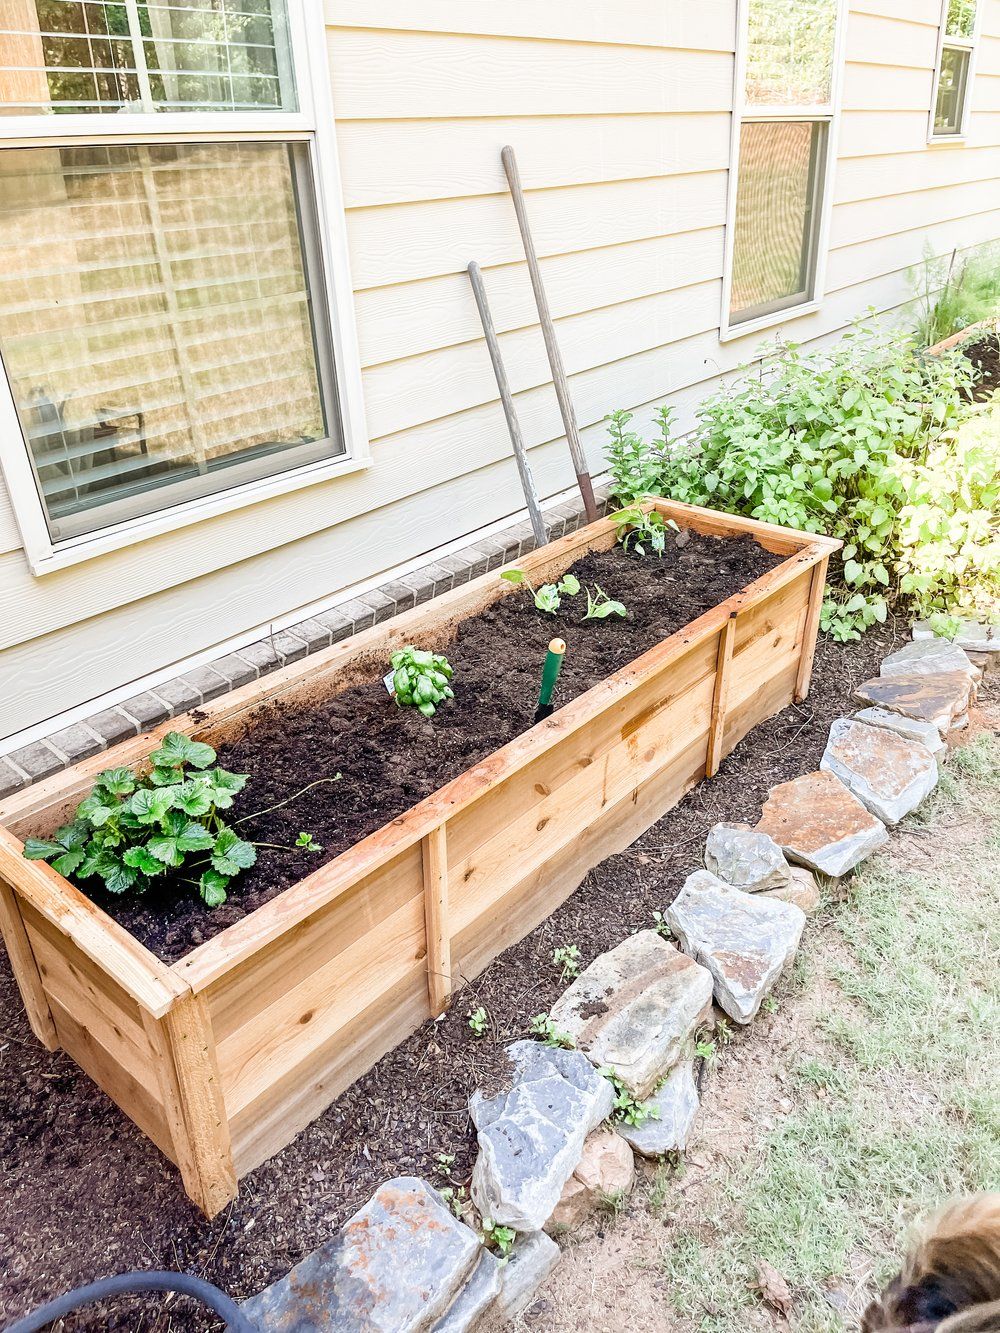 Easy Steps to Make Your Own Garden Planter Boxes from Scratch